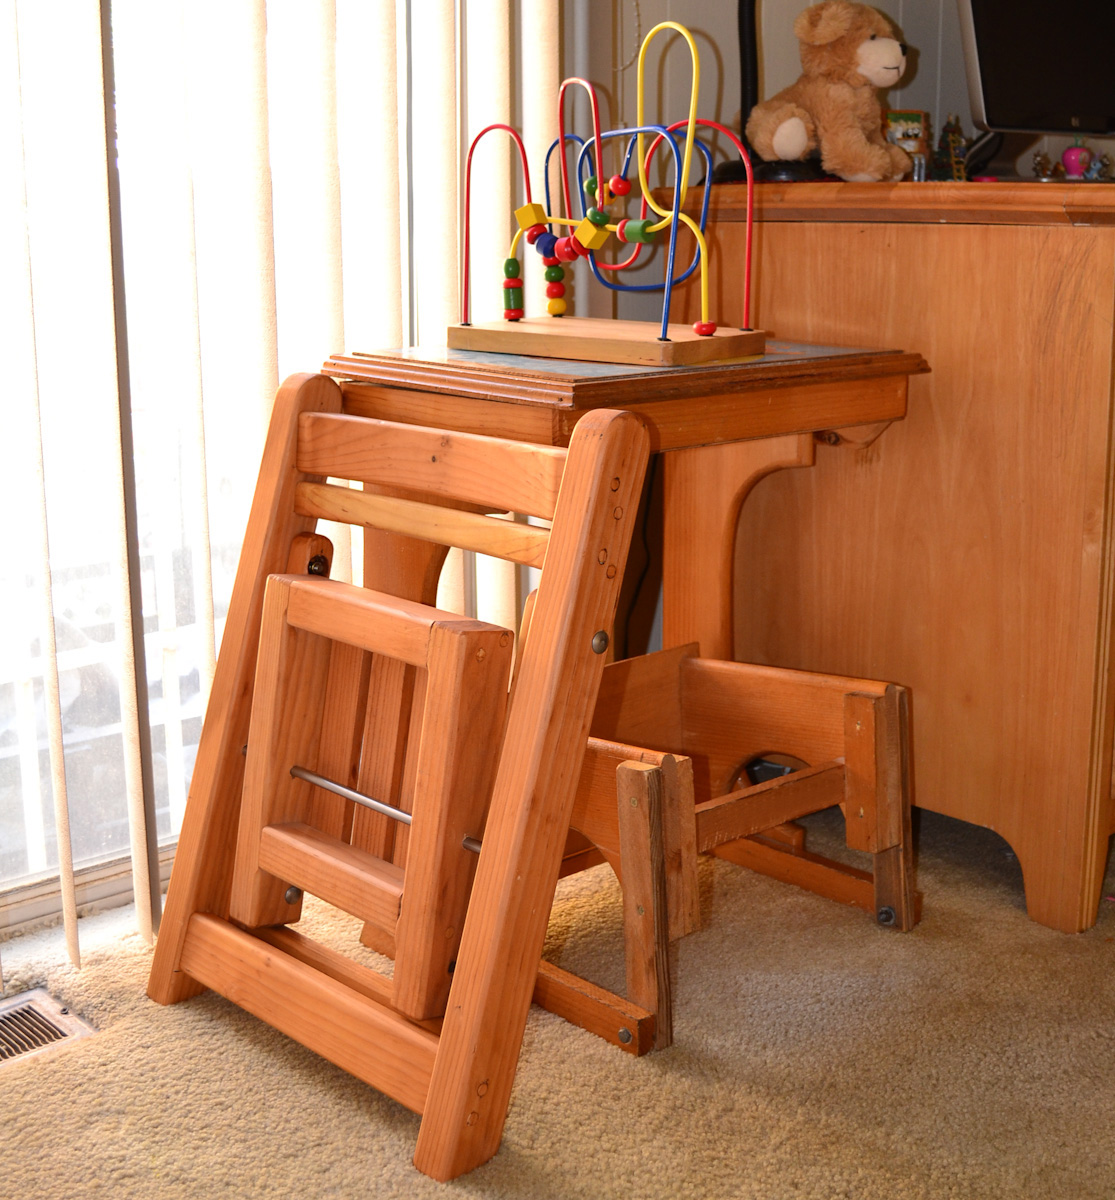 Kid's Wooden Folding Chair